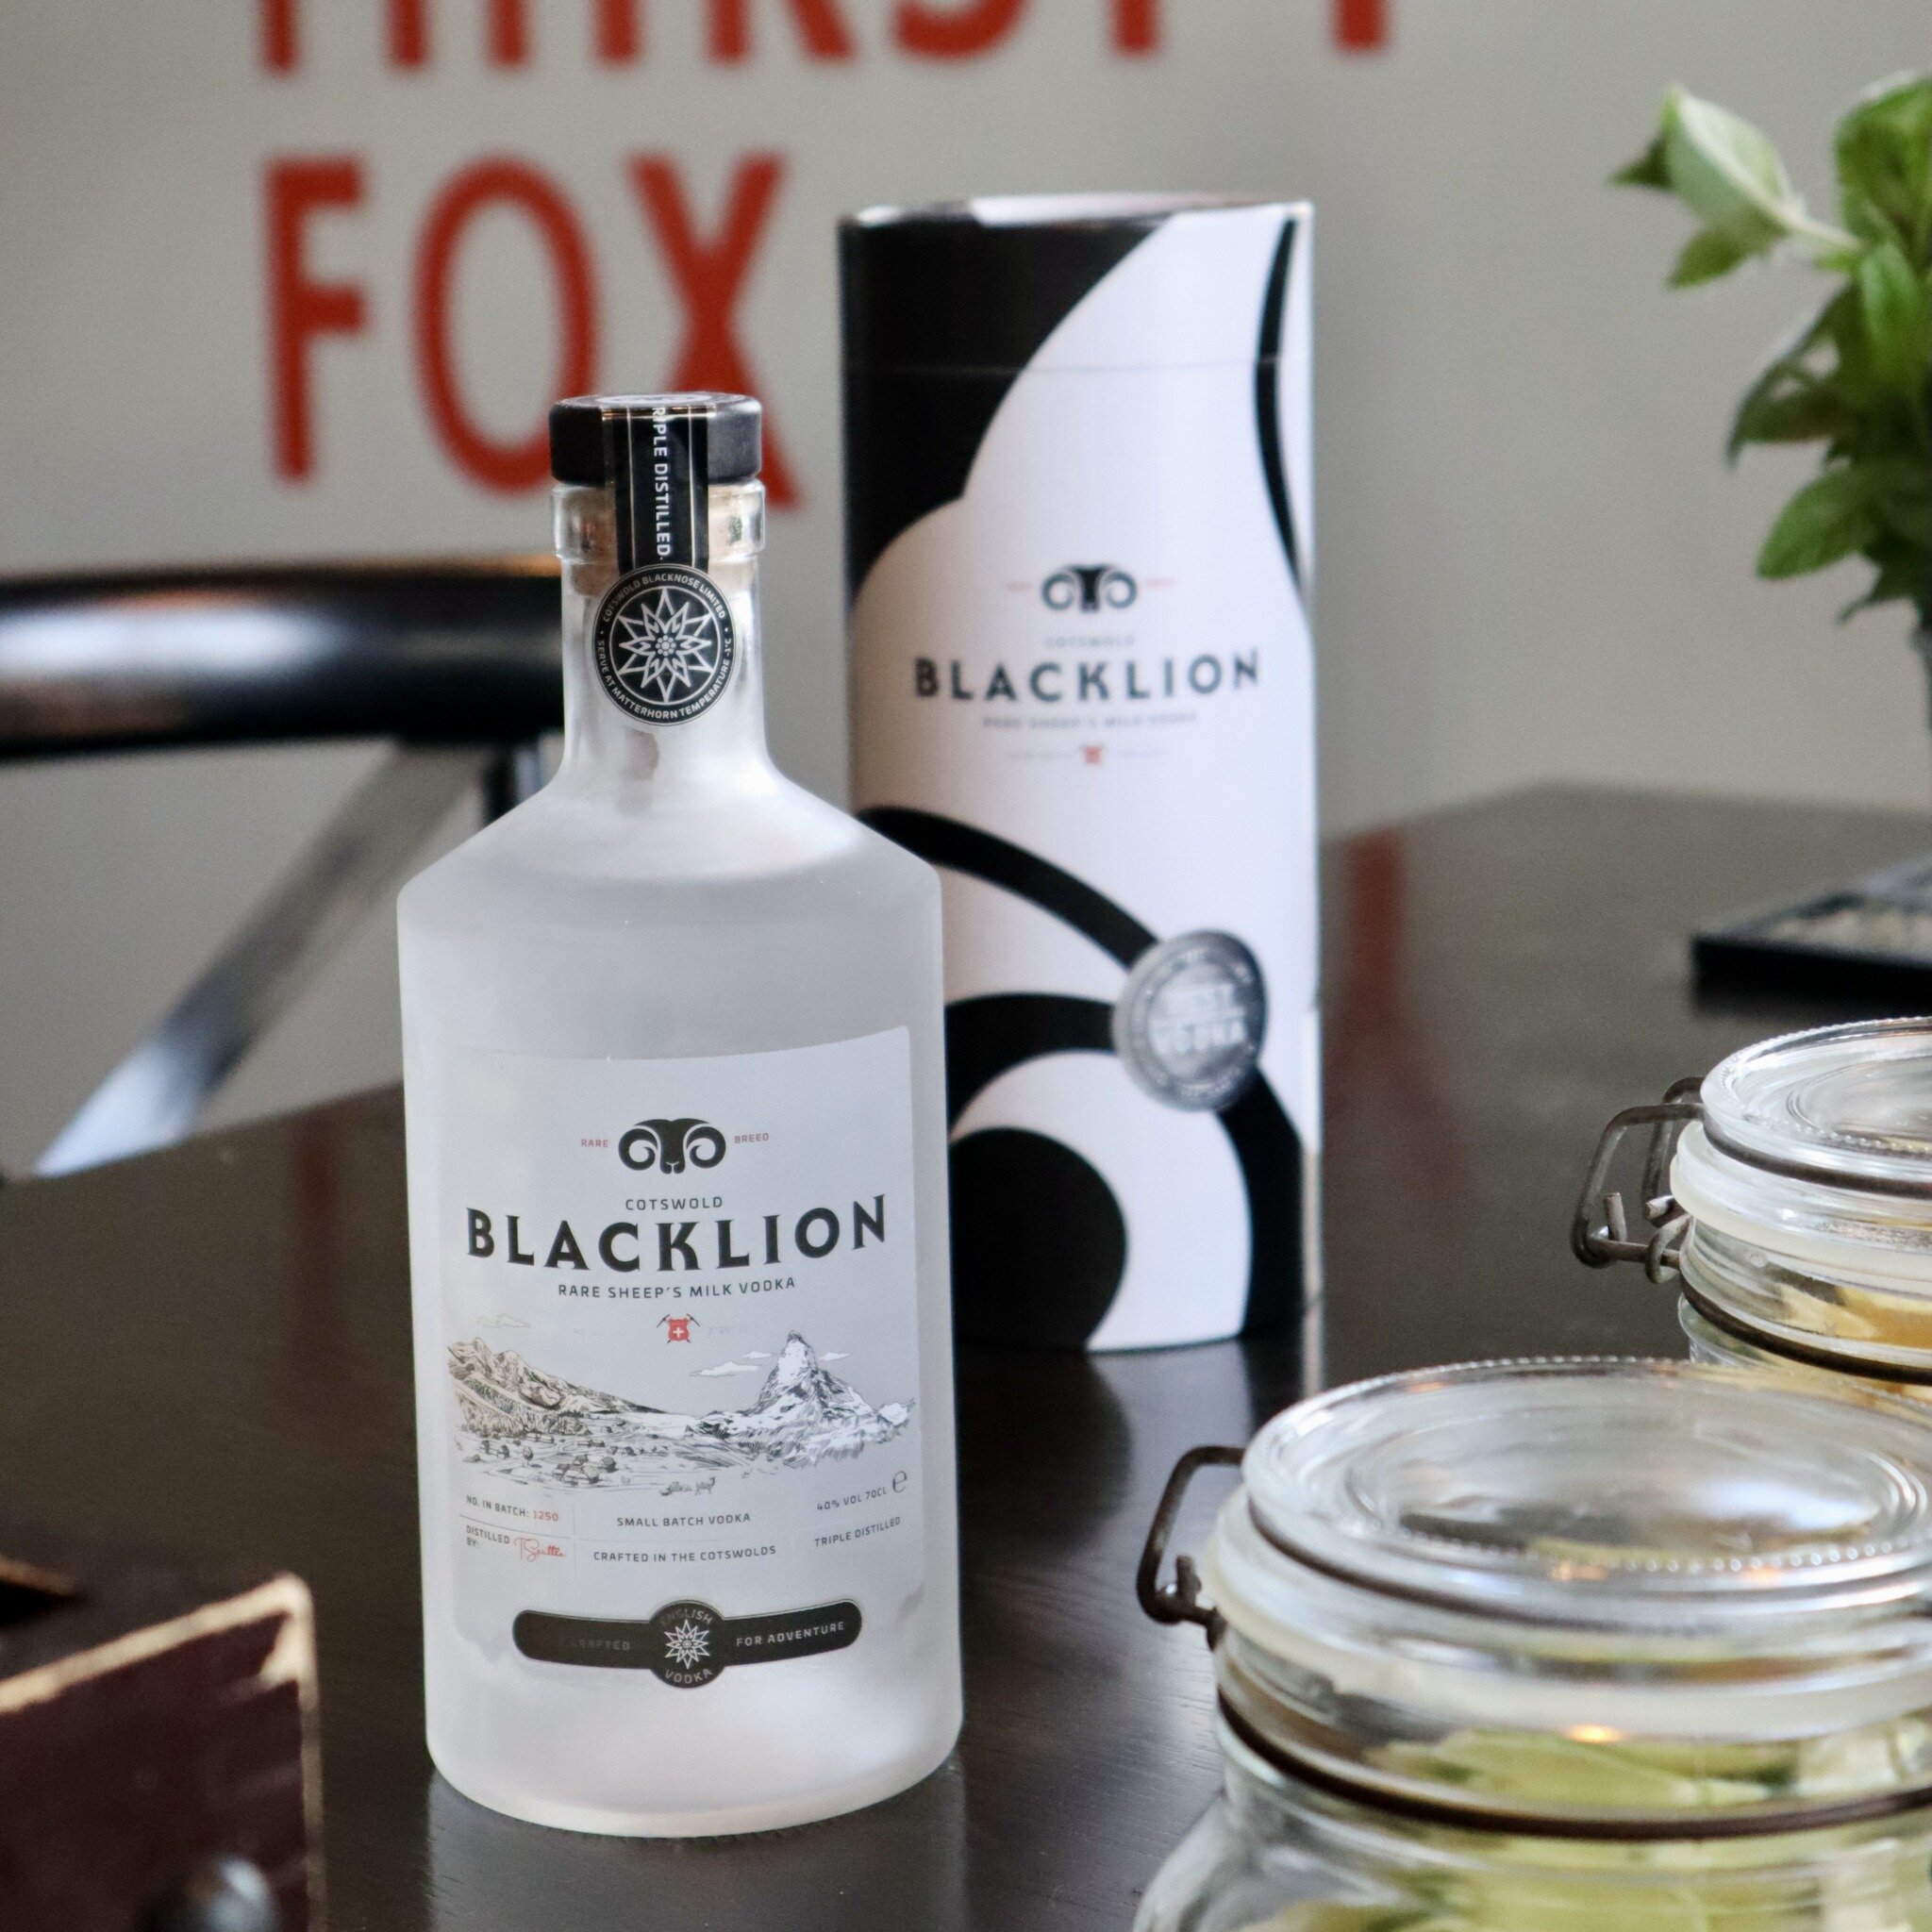 We take our bourbon seriously around here, but tonight we're going on an adventure with @blacklionvodka - the world's first vodka made from sheep's milk. If you find yourself in the neighborhood, stop by for samples of cocktails tonight at 6:30pm and